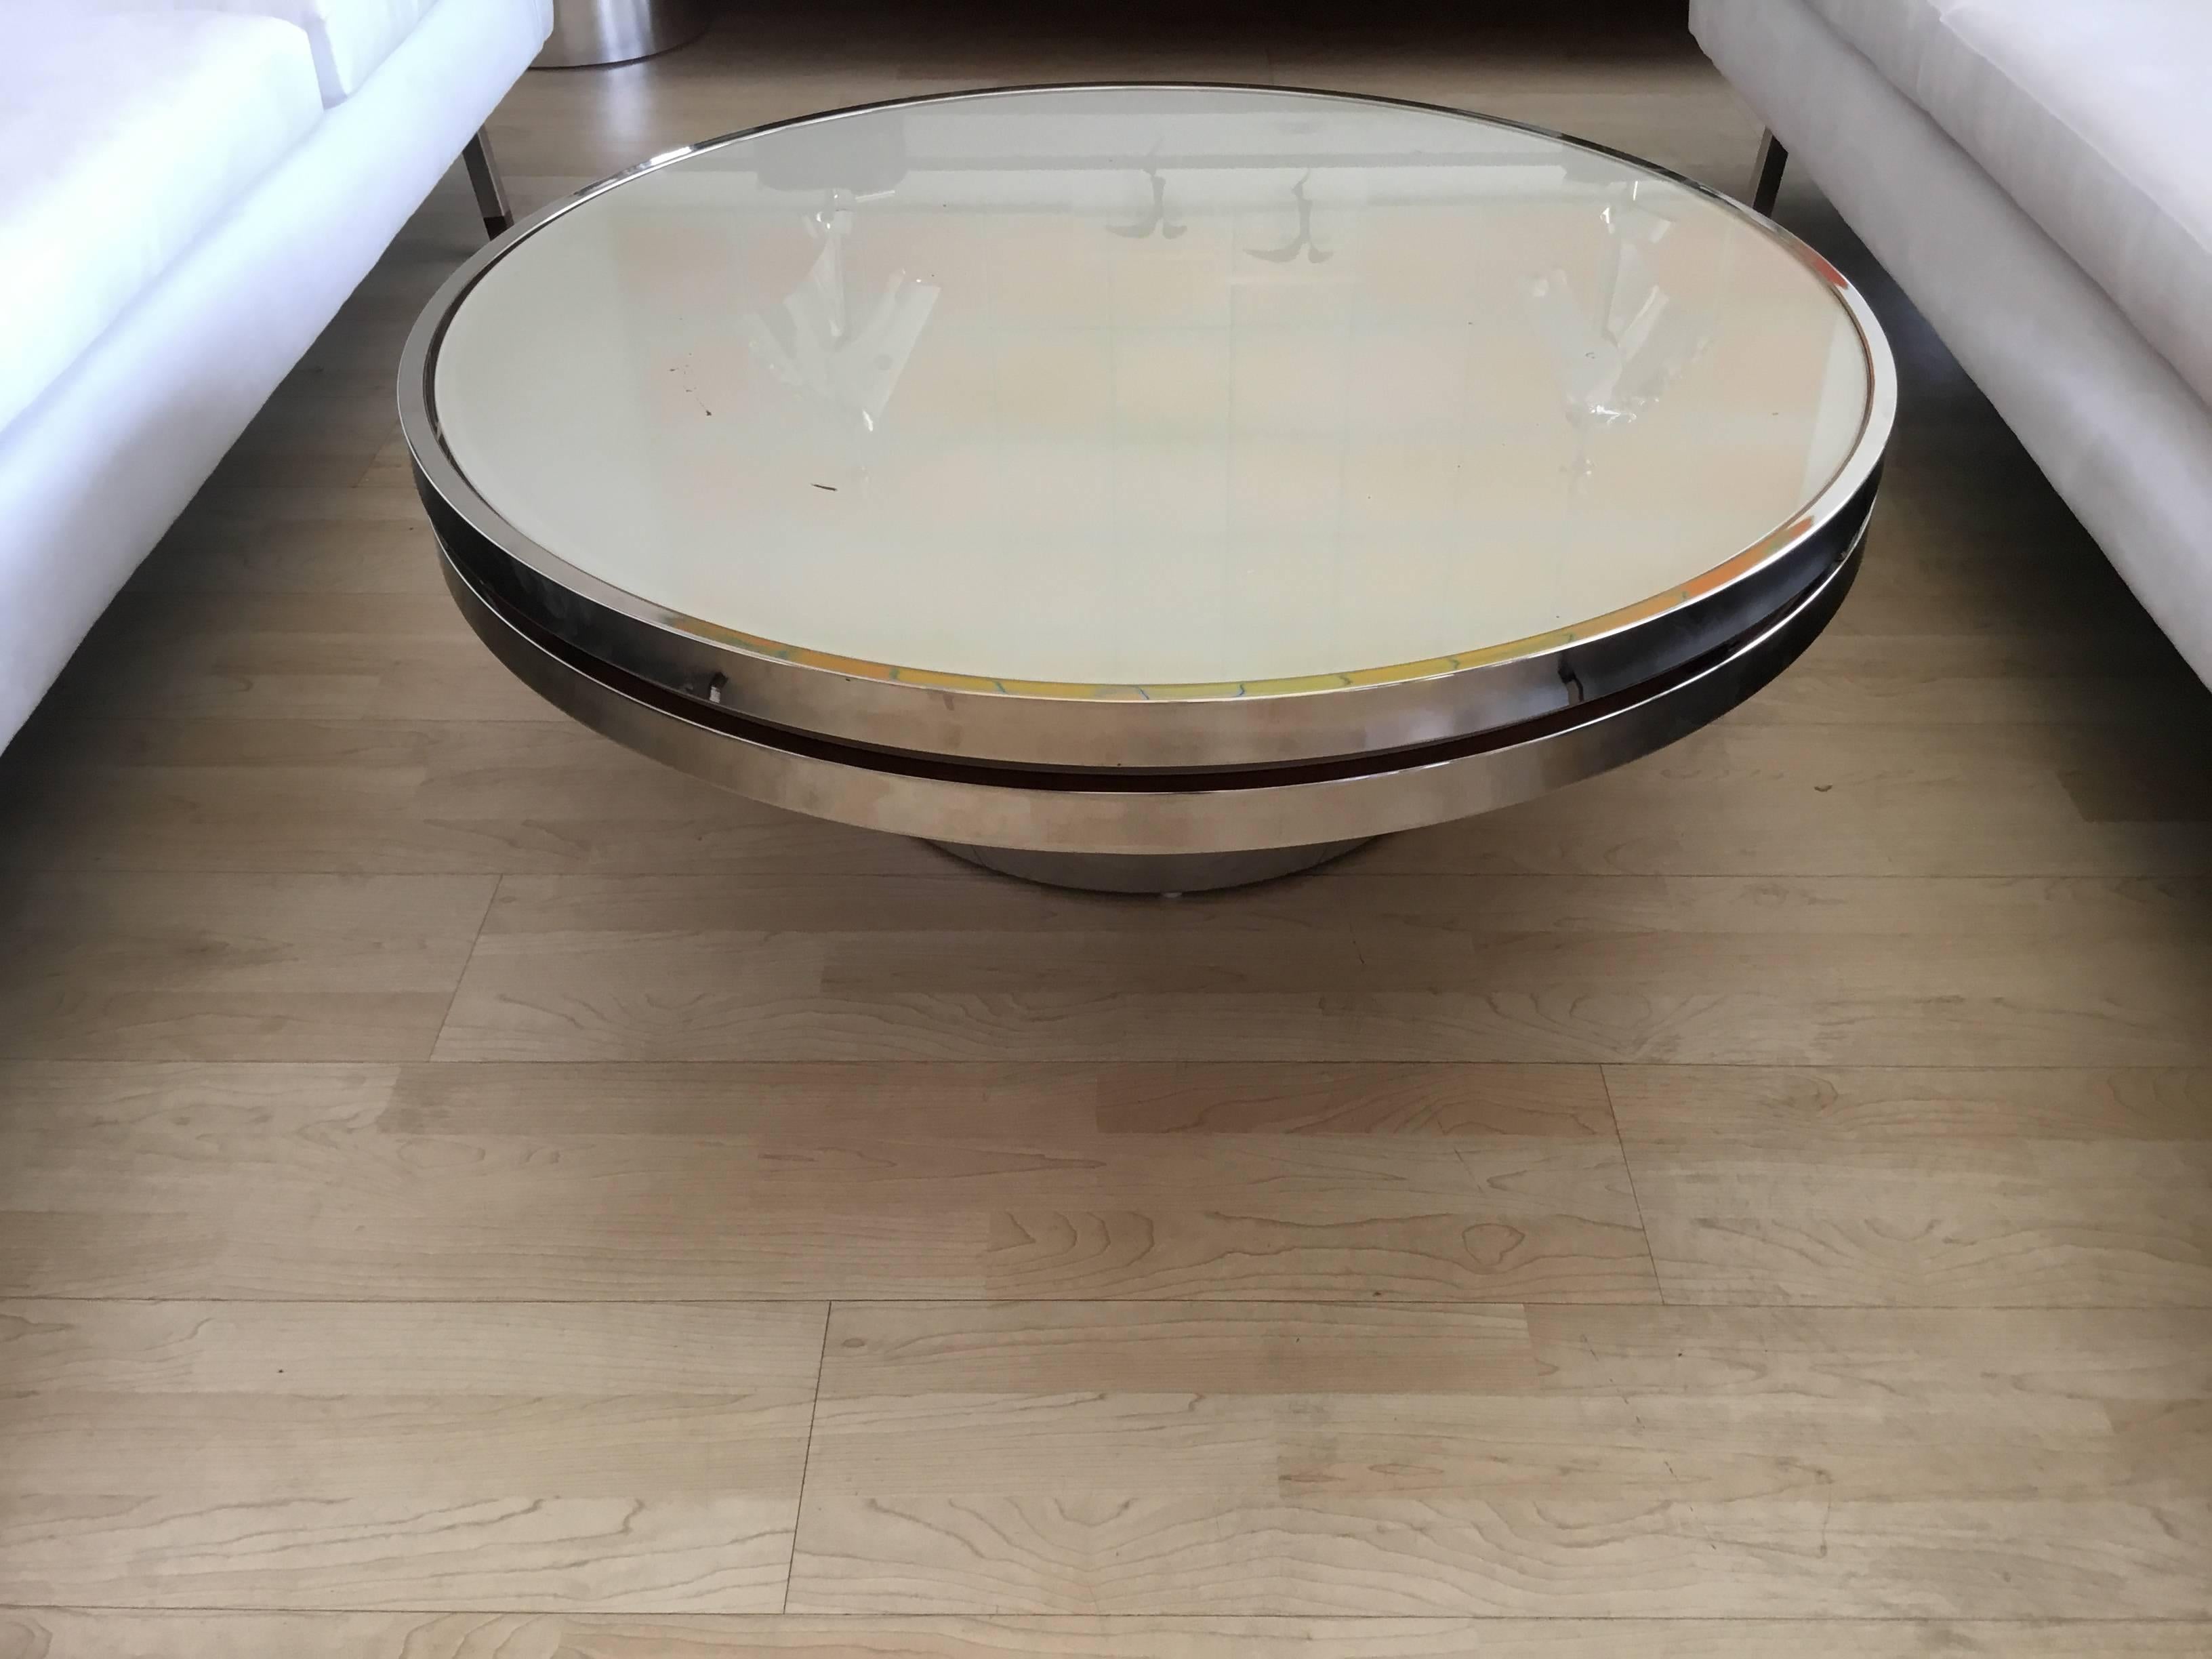 The table is in perfect condition. The base is high polished steel as well as the banding around the glass. The glass can be changed easily if you prefer another color. 